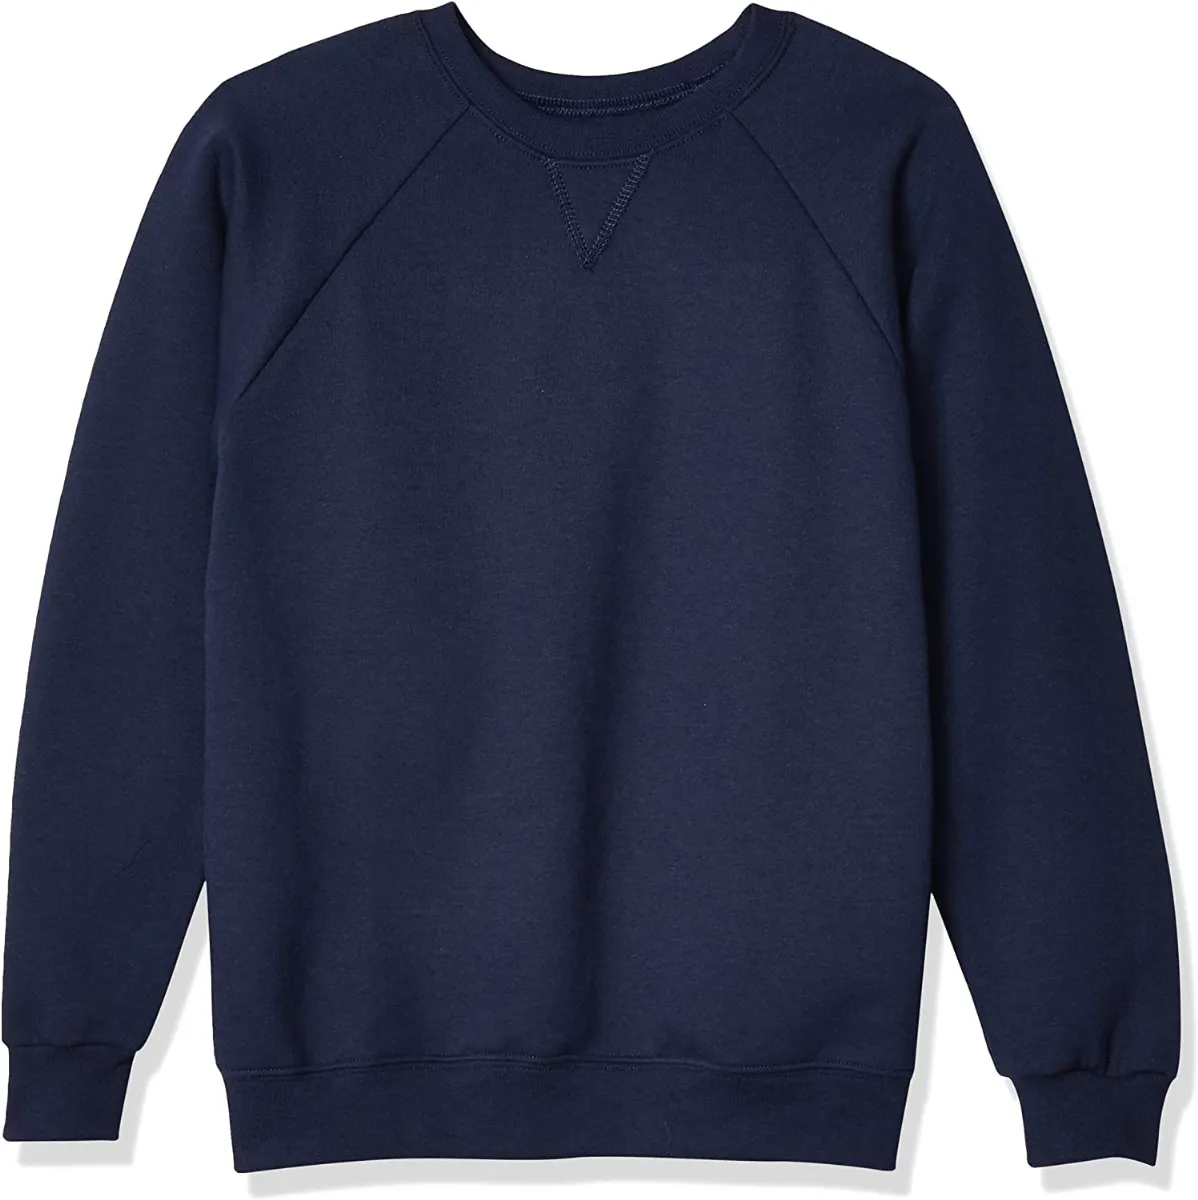 24 Pieces of Youth Crew Neck Sweatshirt Solid Navy - Size Small